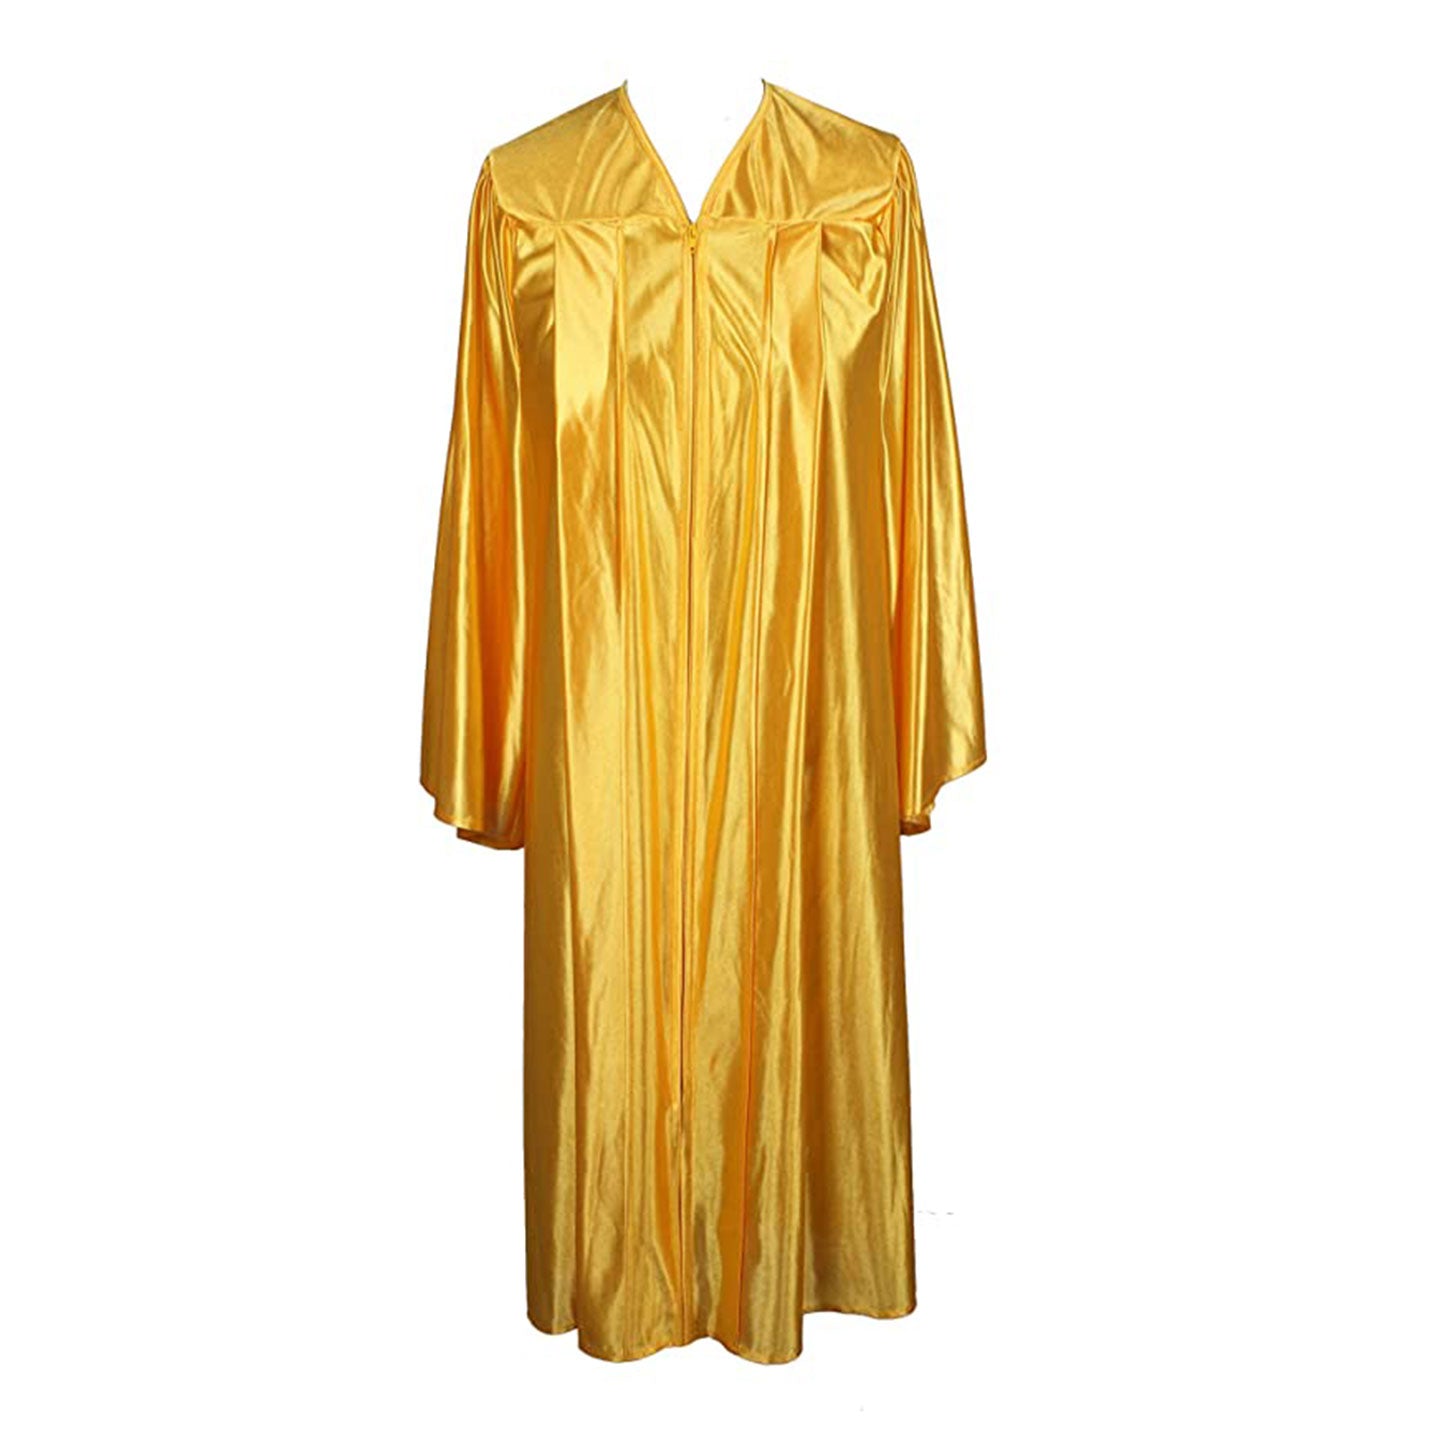 Kinder Shiny Gold Gown